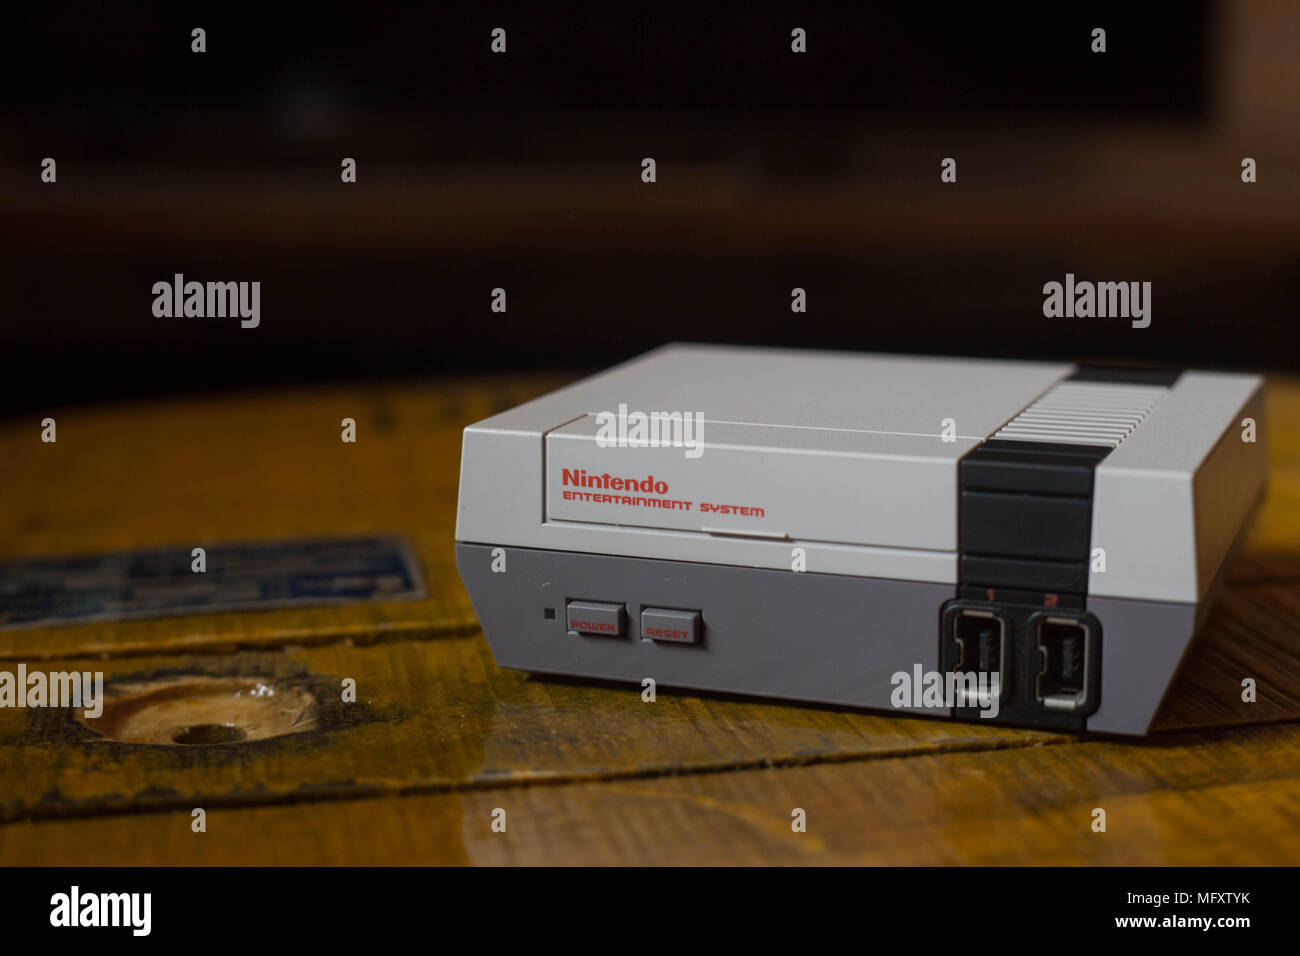 Nes Classic High Resolution Stock Photography and Images - Alamy